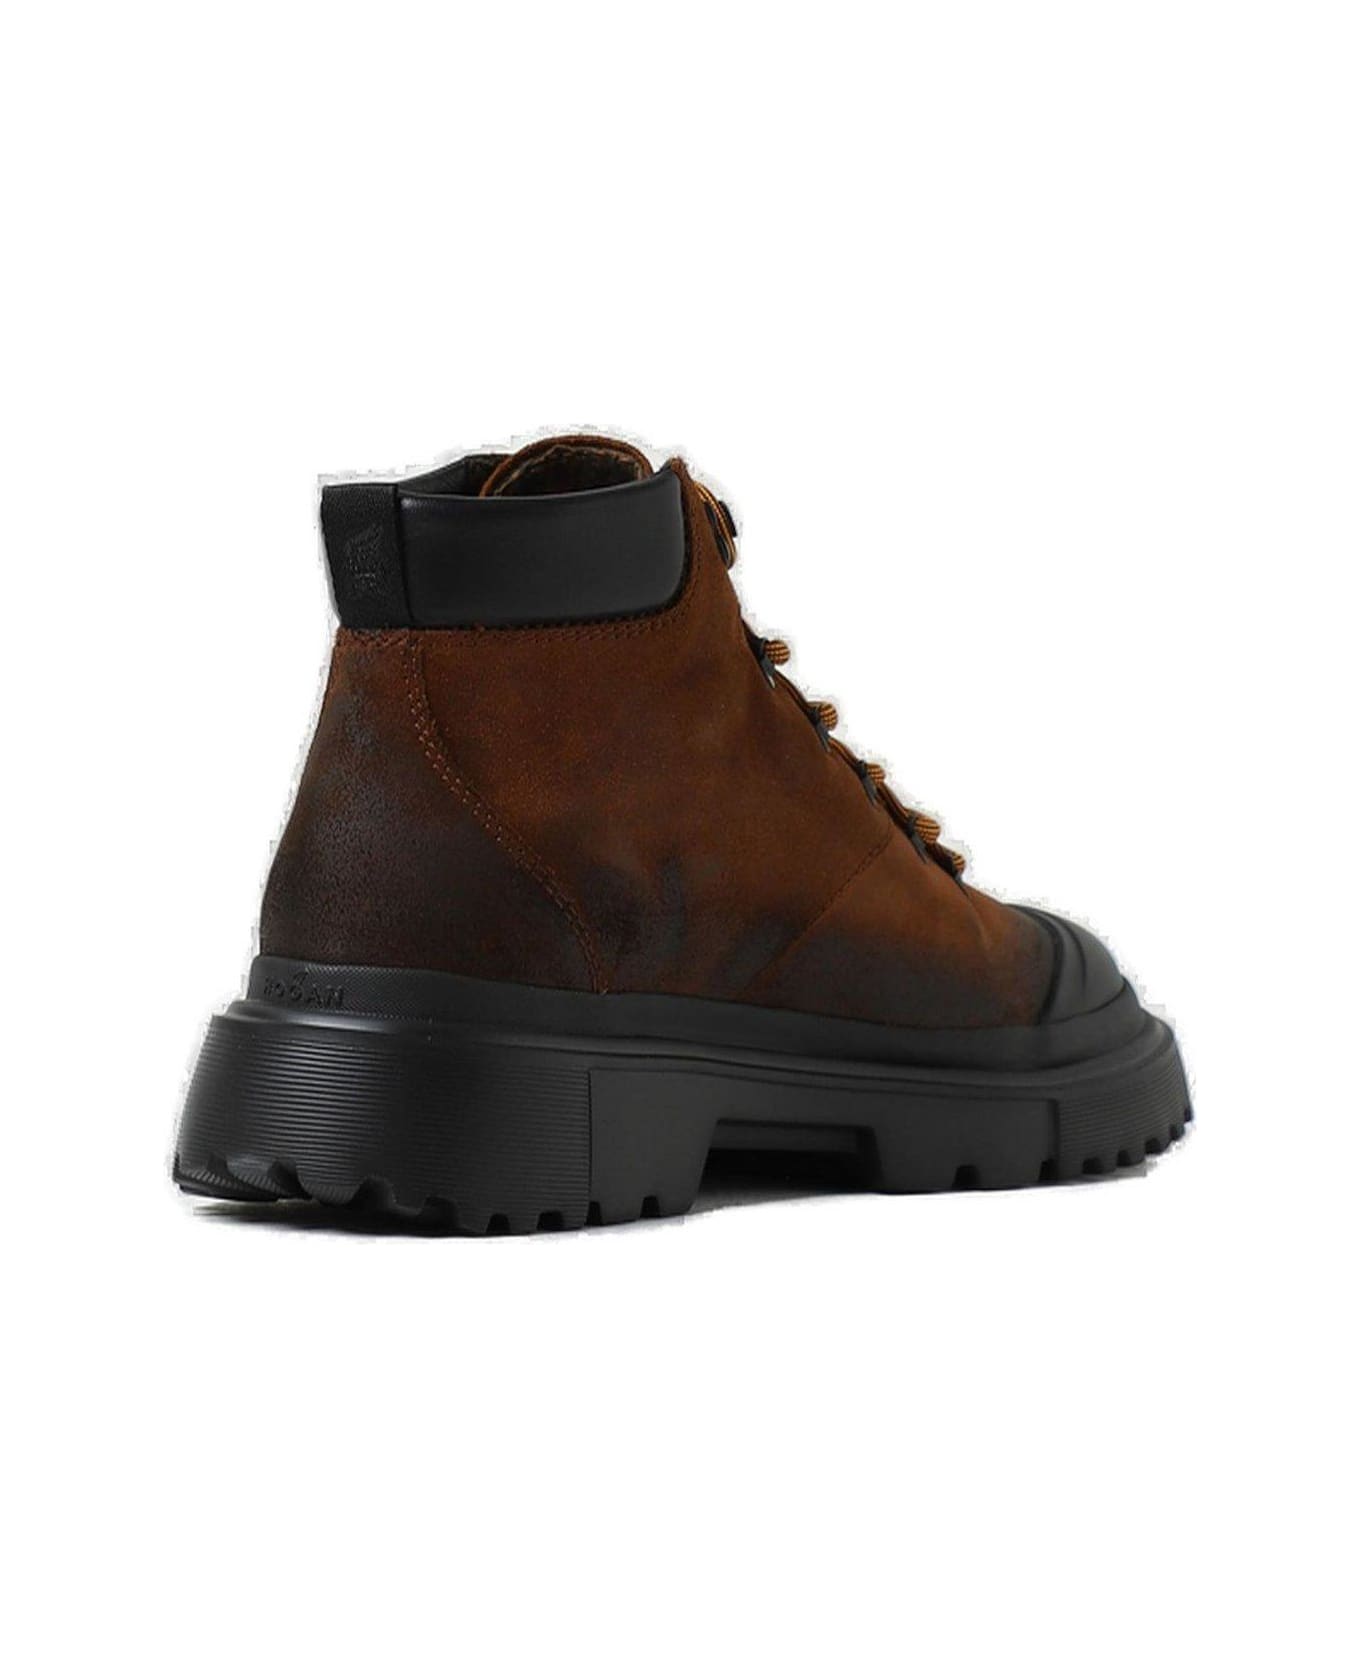 Hogan H619 Chunky-sole Lace-up Boots ブーツ